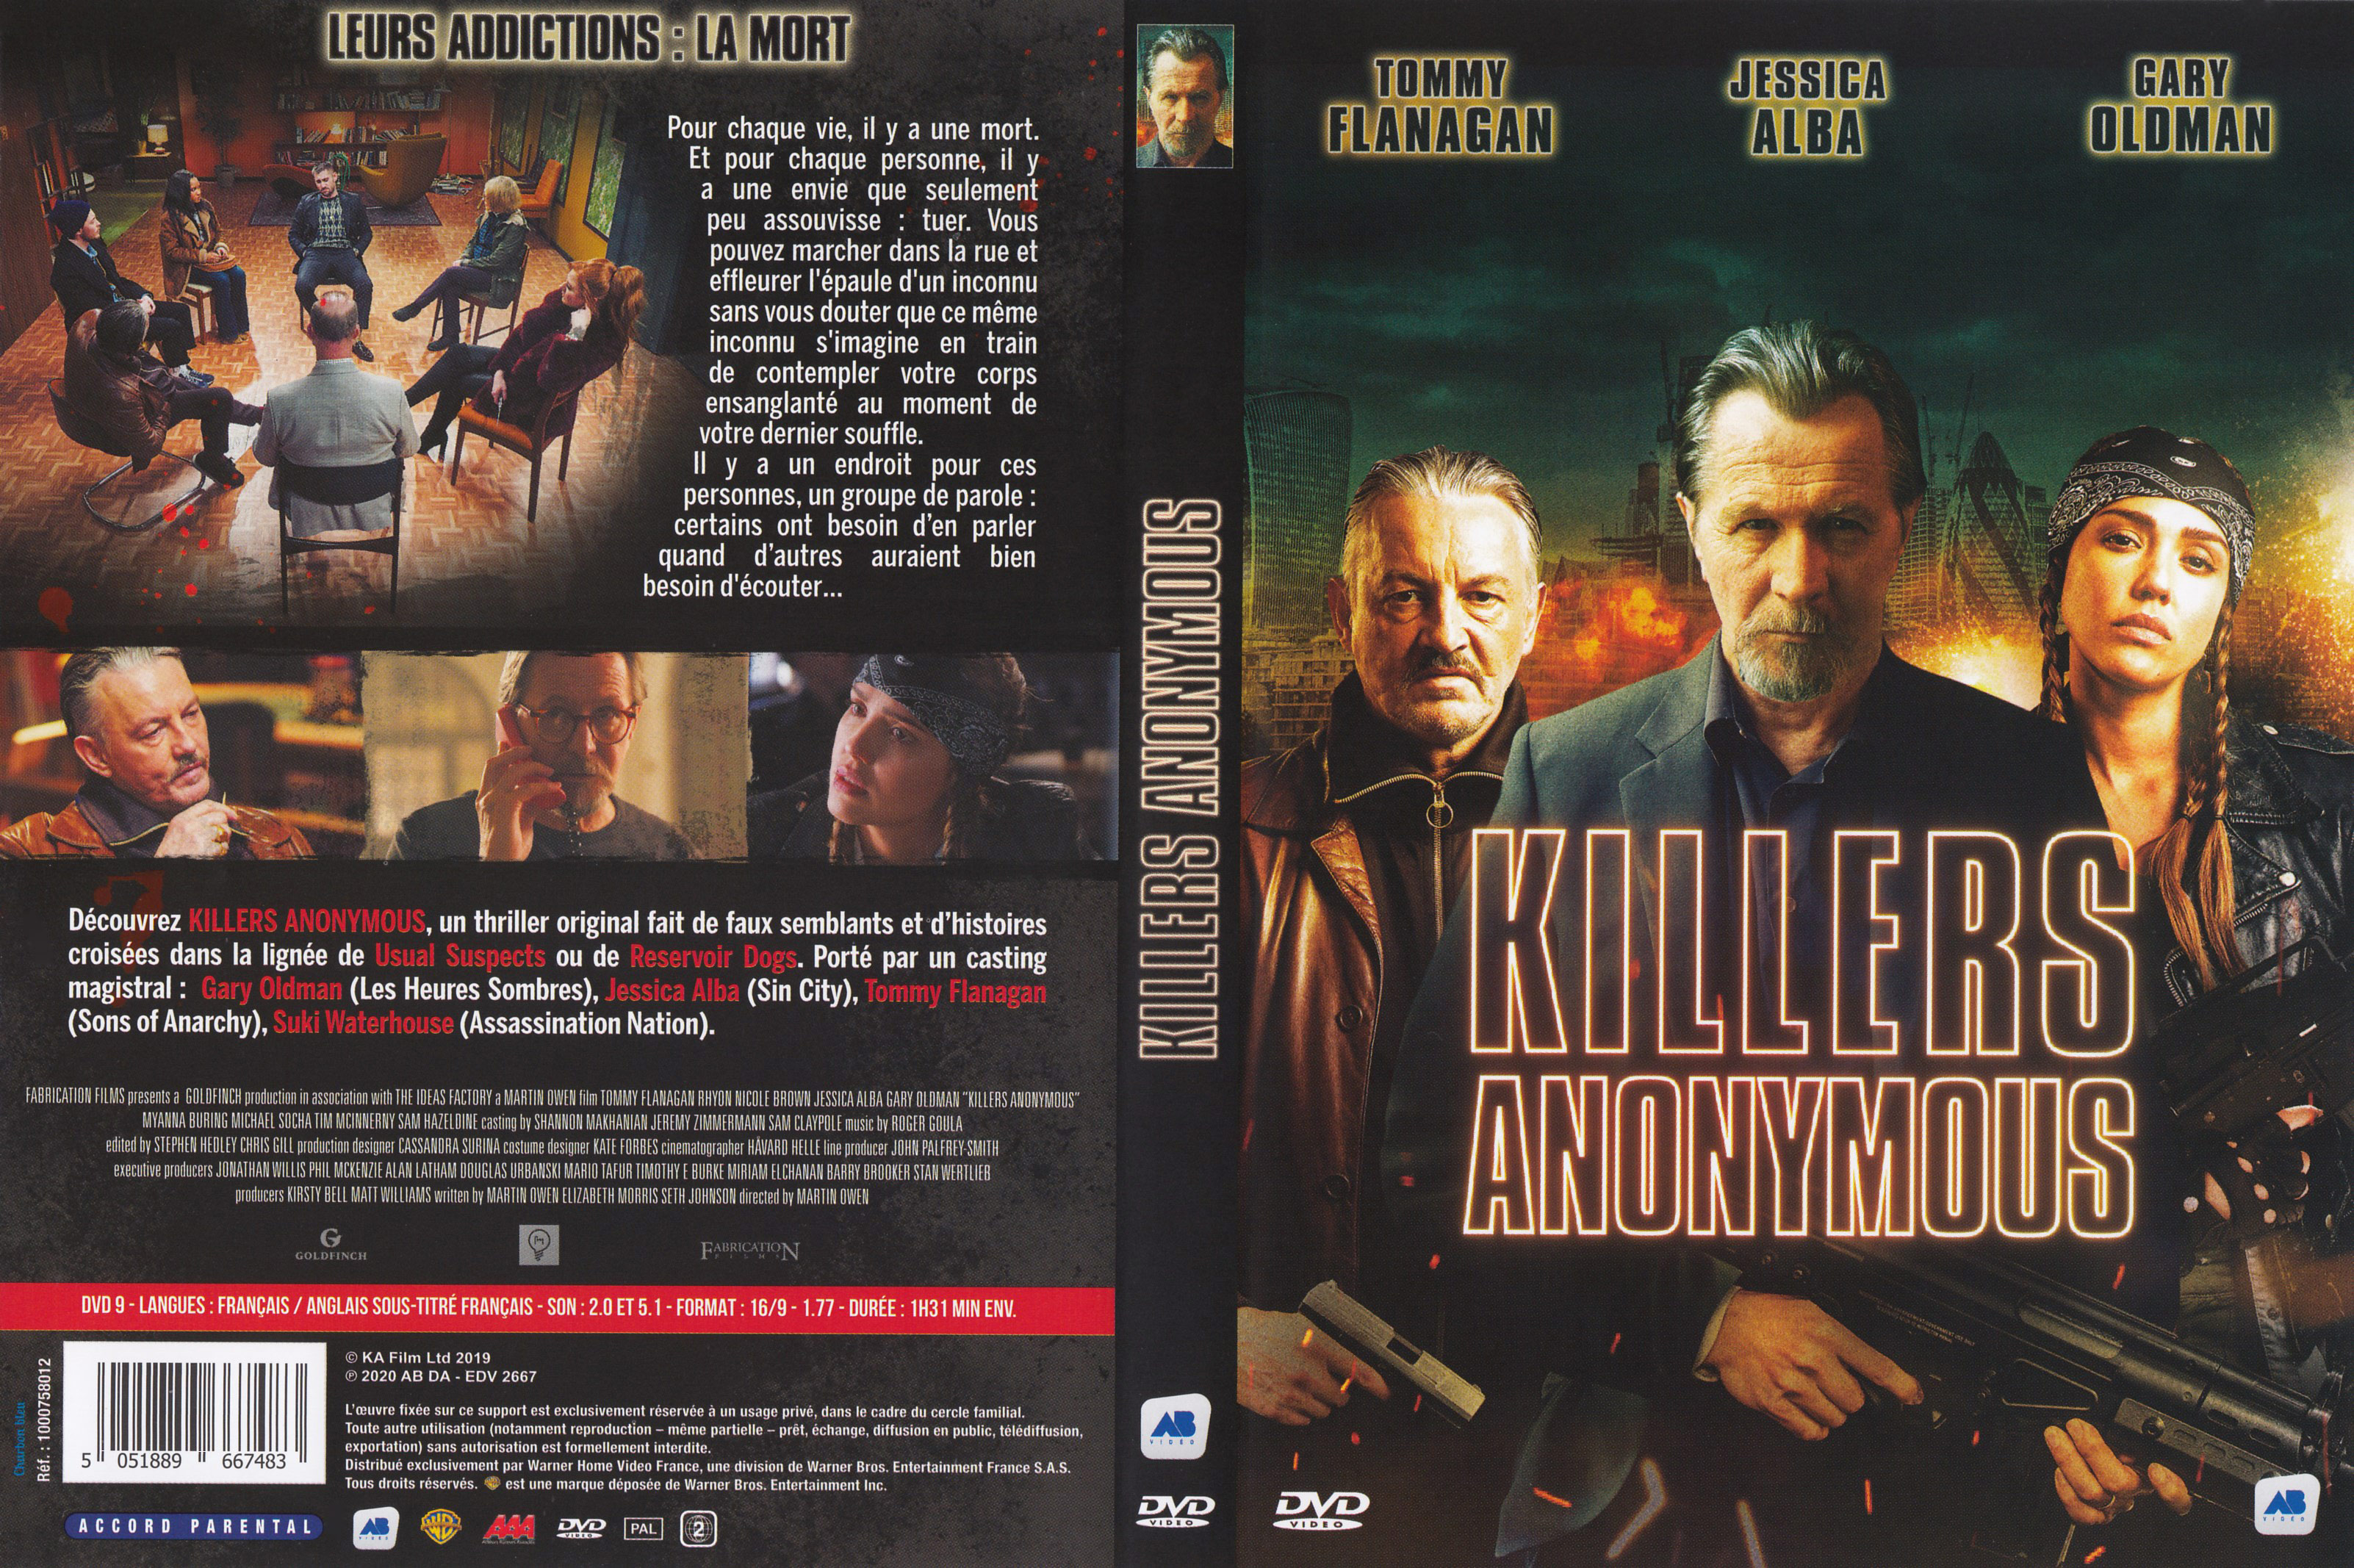 Jaquette DVD Killers anonymous